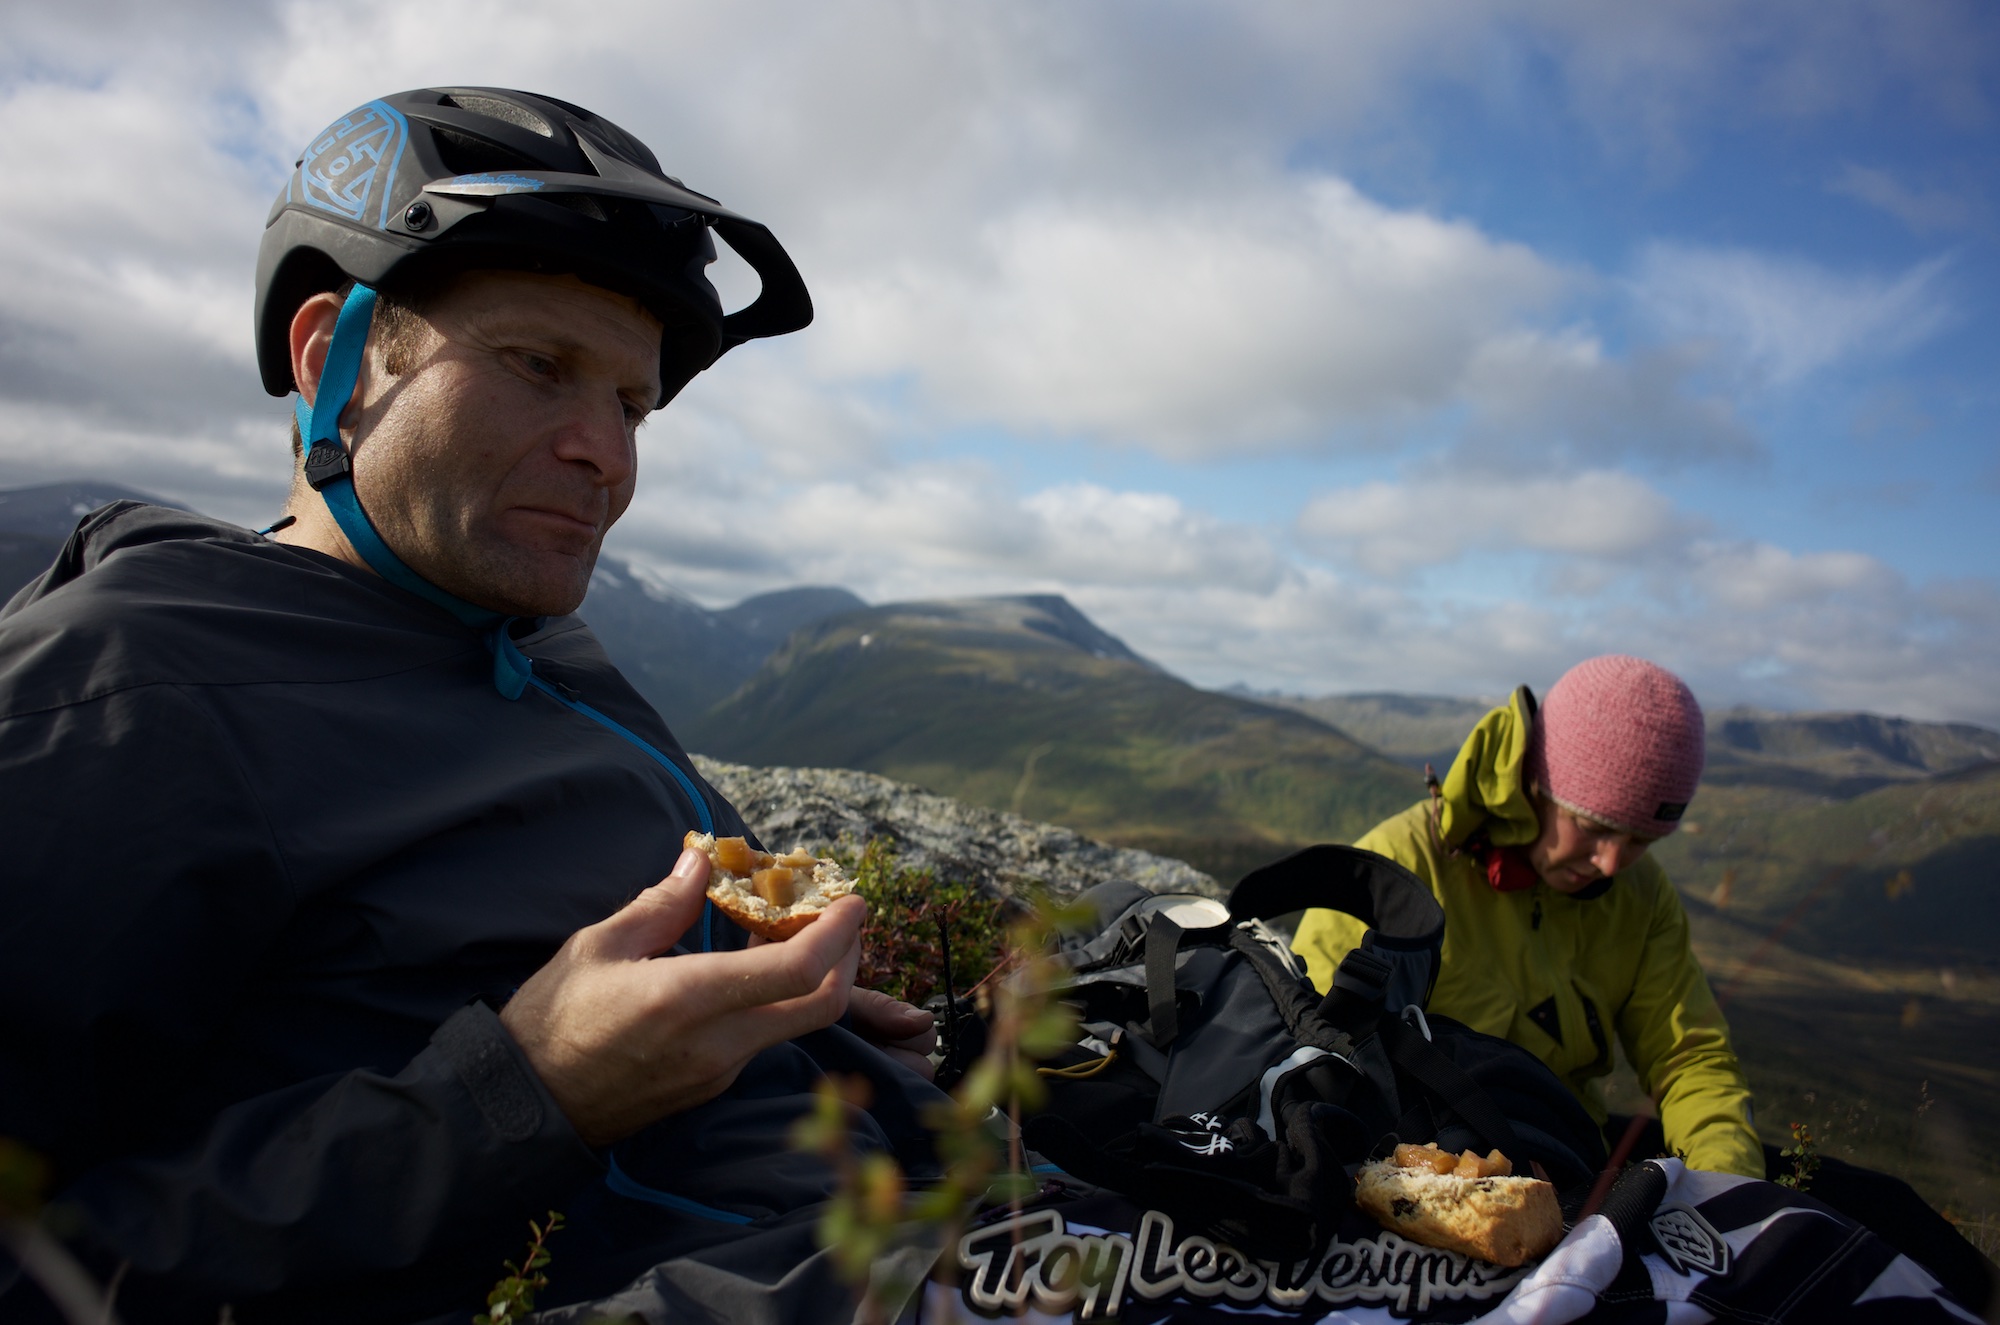 ...and it works a treat! Probably my best summit snack this season.